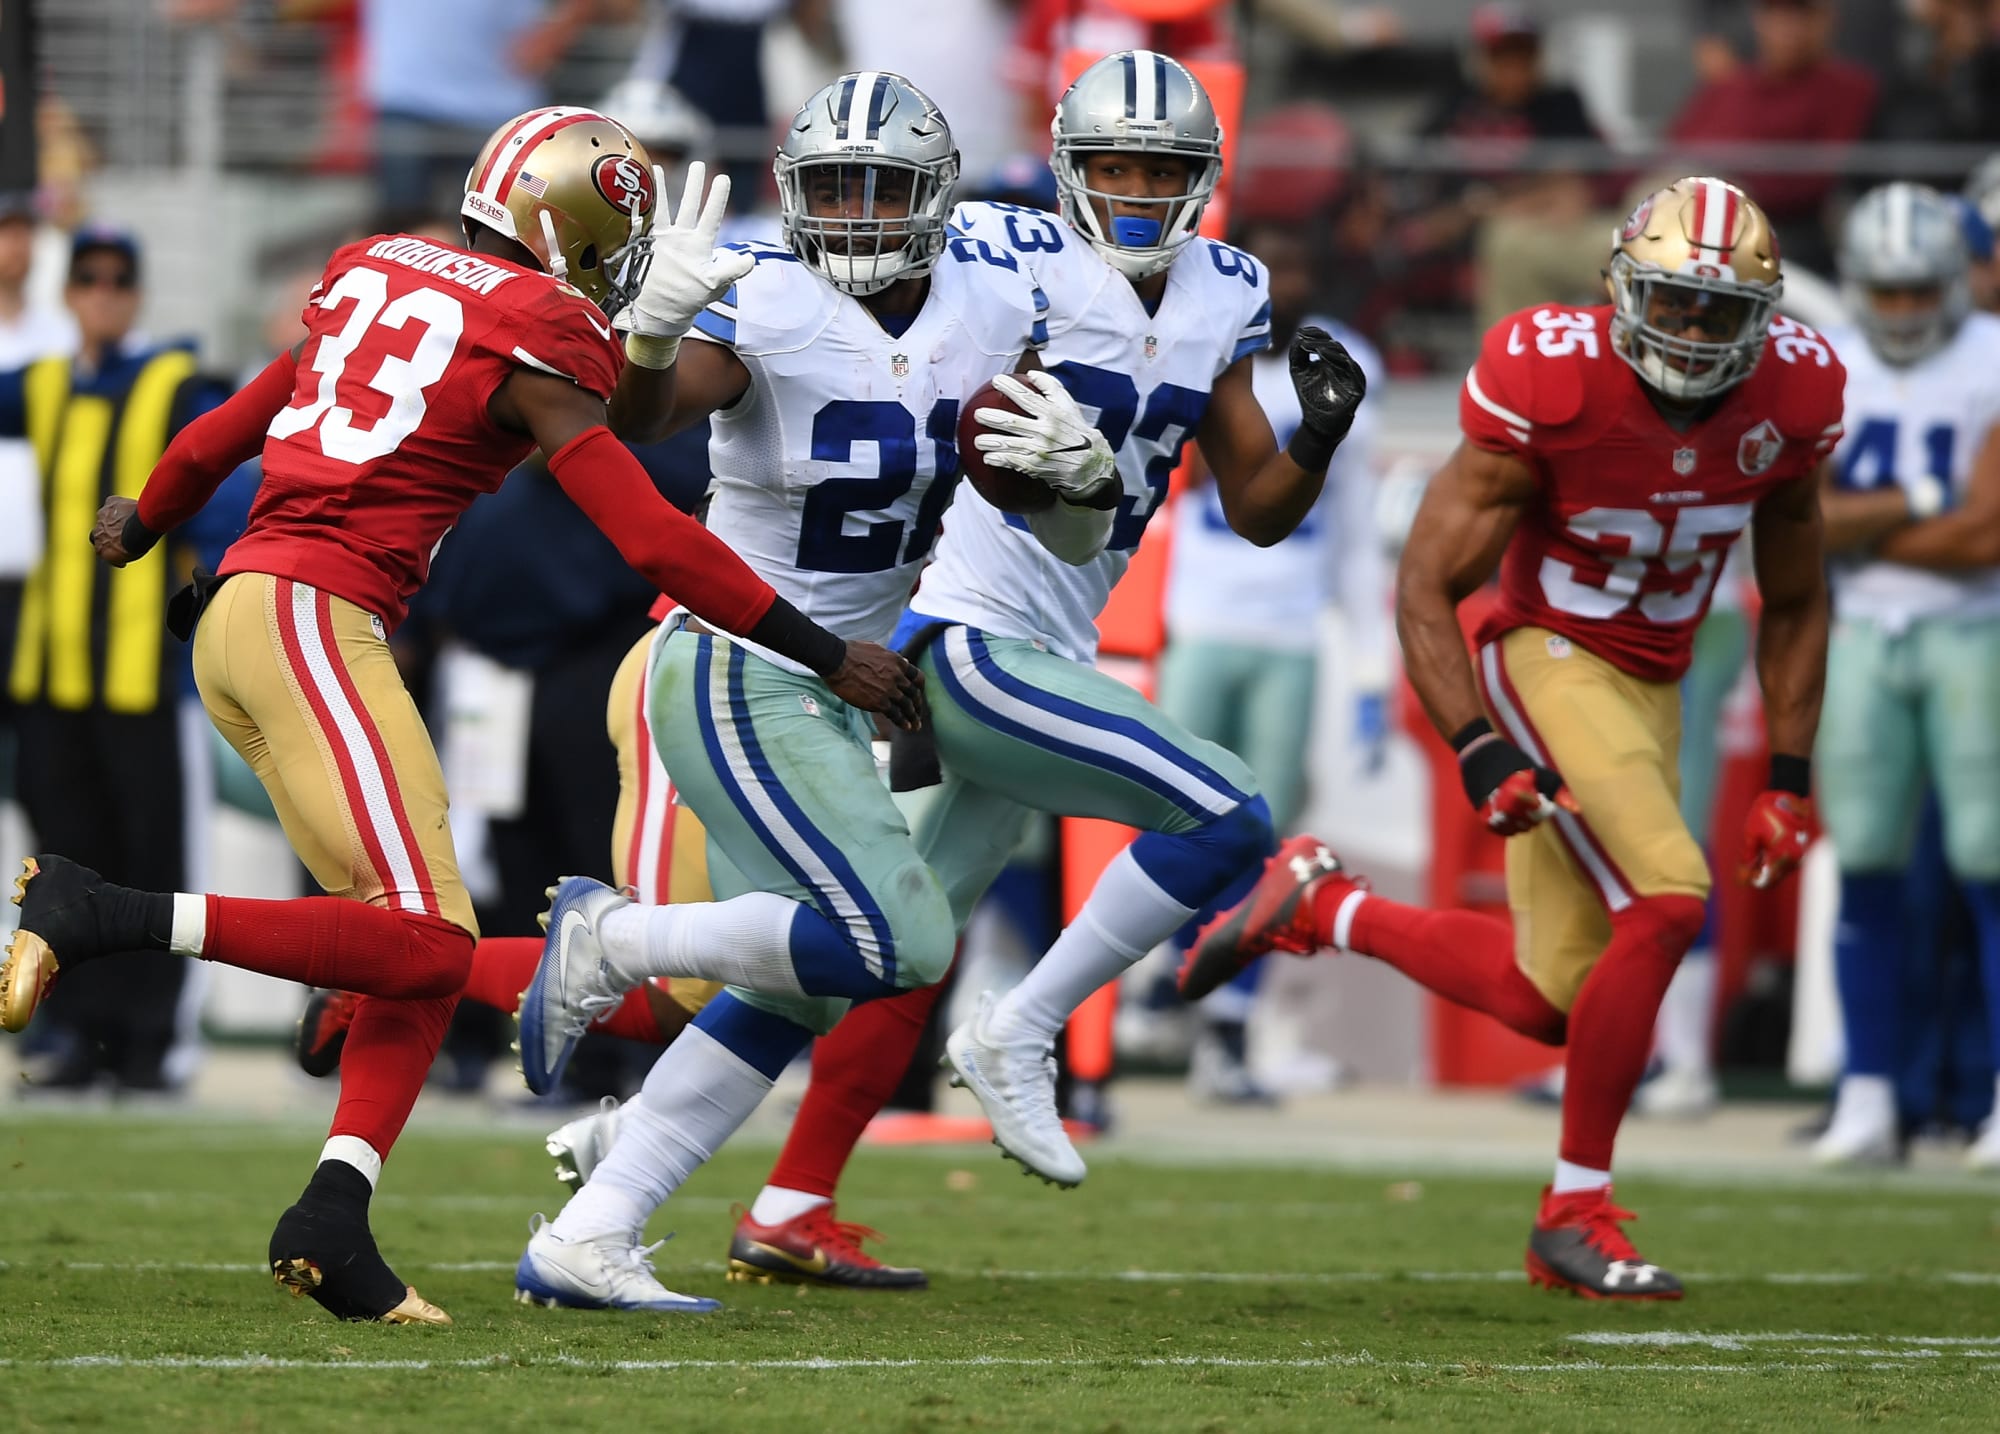 Cowboys vs. 49ers Preview, score prediction for Week 7